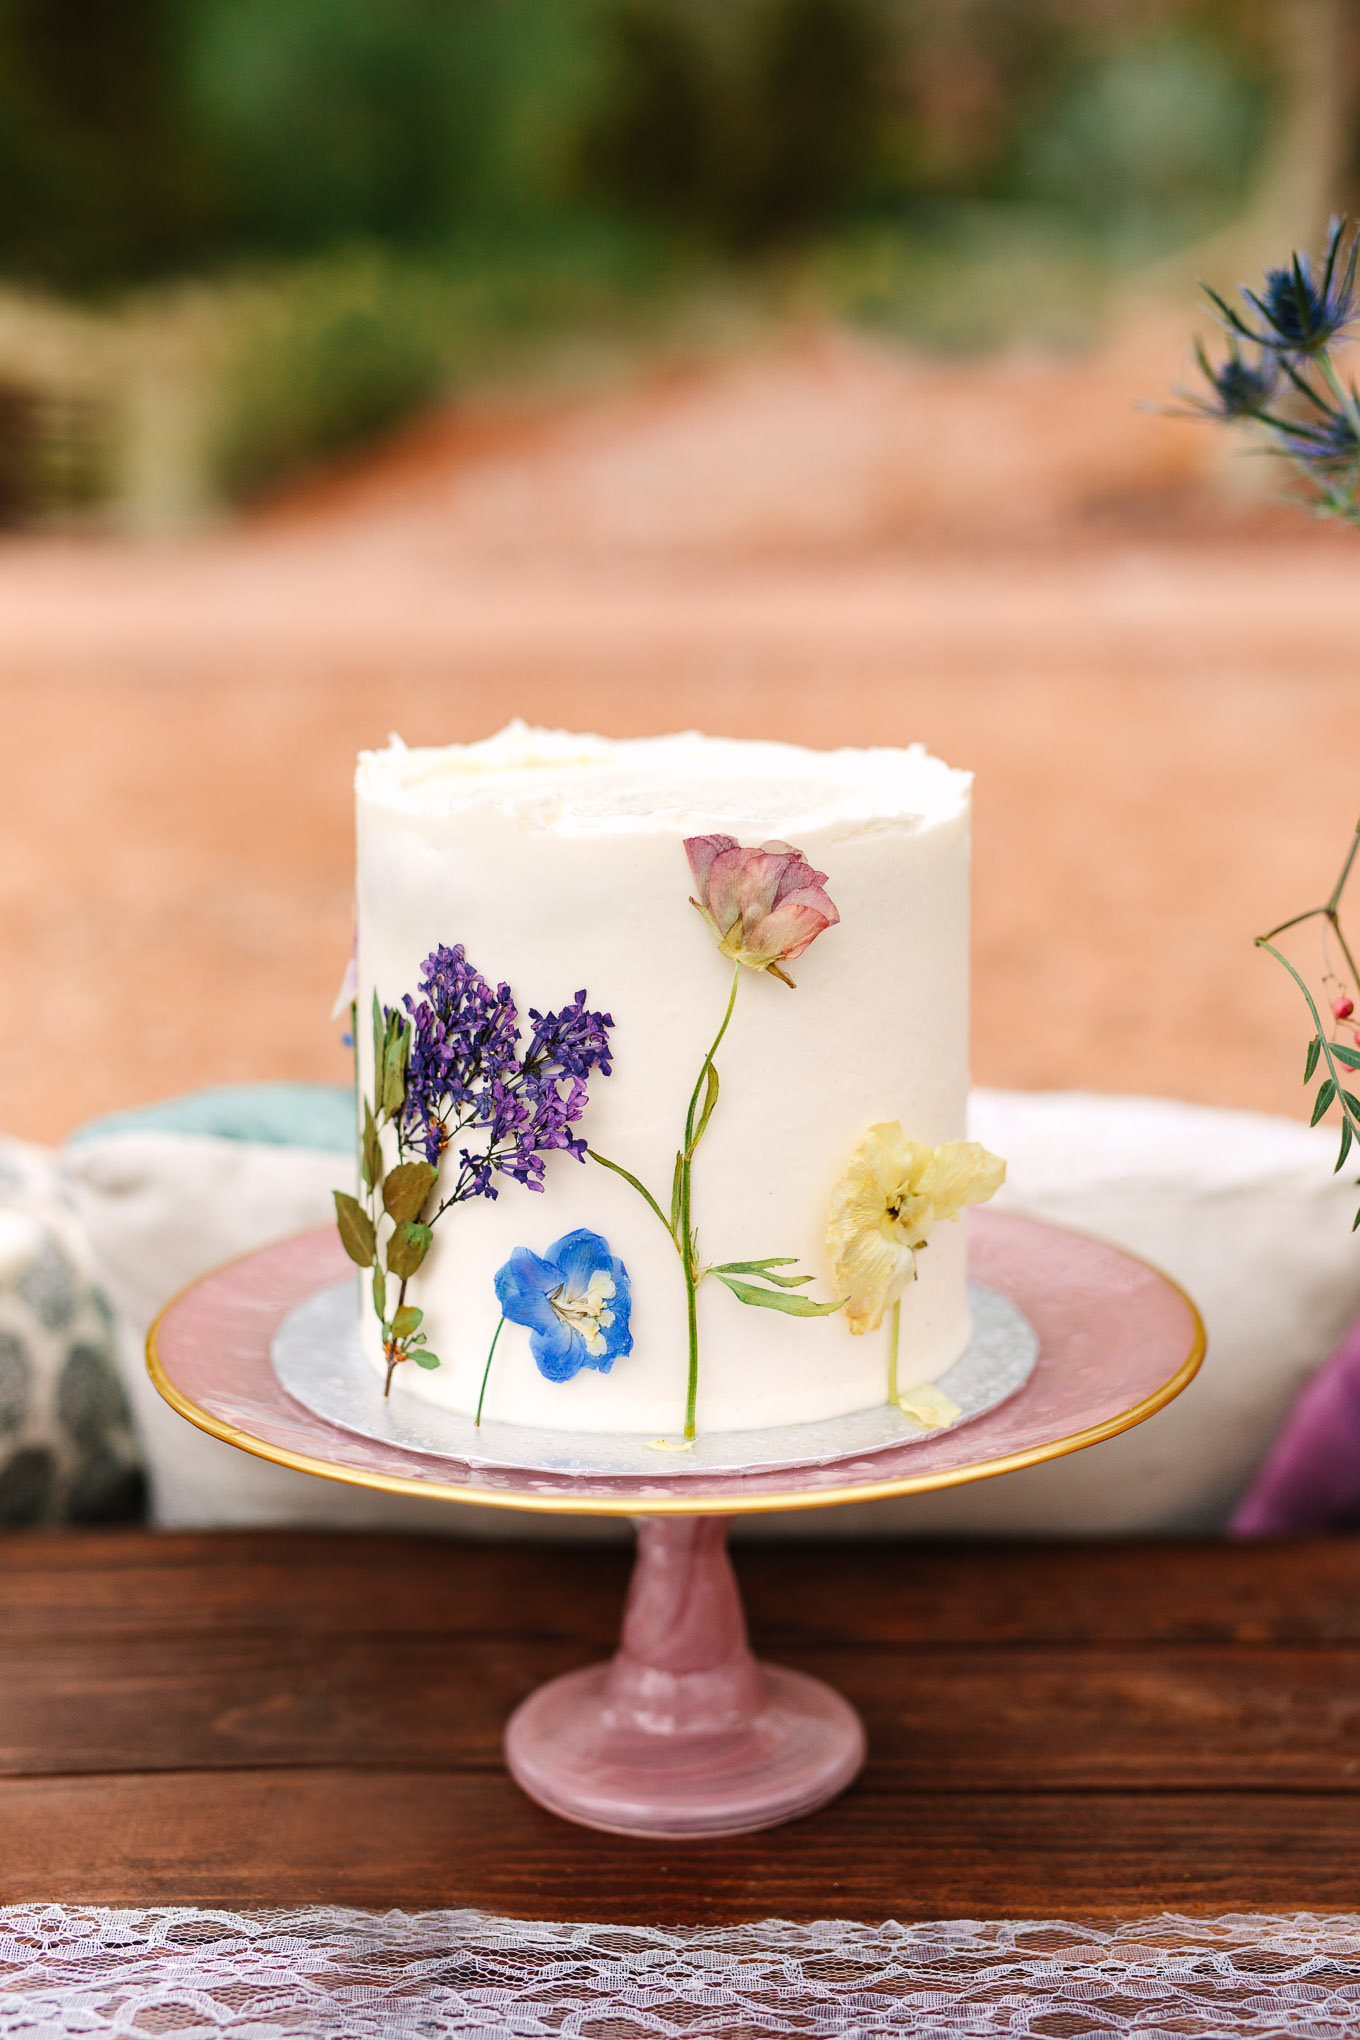 Pressed flower cake for purple and jewel tone picnic setup | Zion National Park elopement | Colorful adventure elopement photography | #utahelopement #zionelopement #zionwedding #undercanvaszion #picnicwedding  Source: Mary Costa Photography | Los Angeles